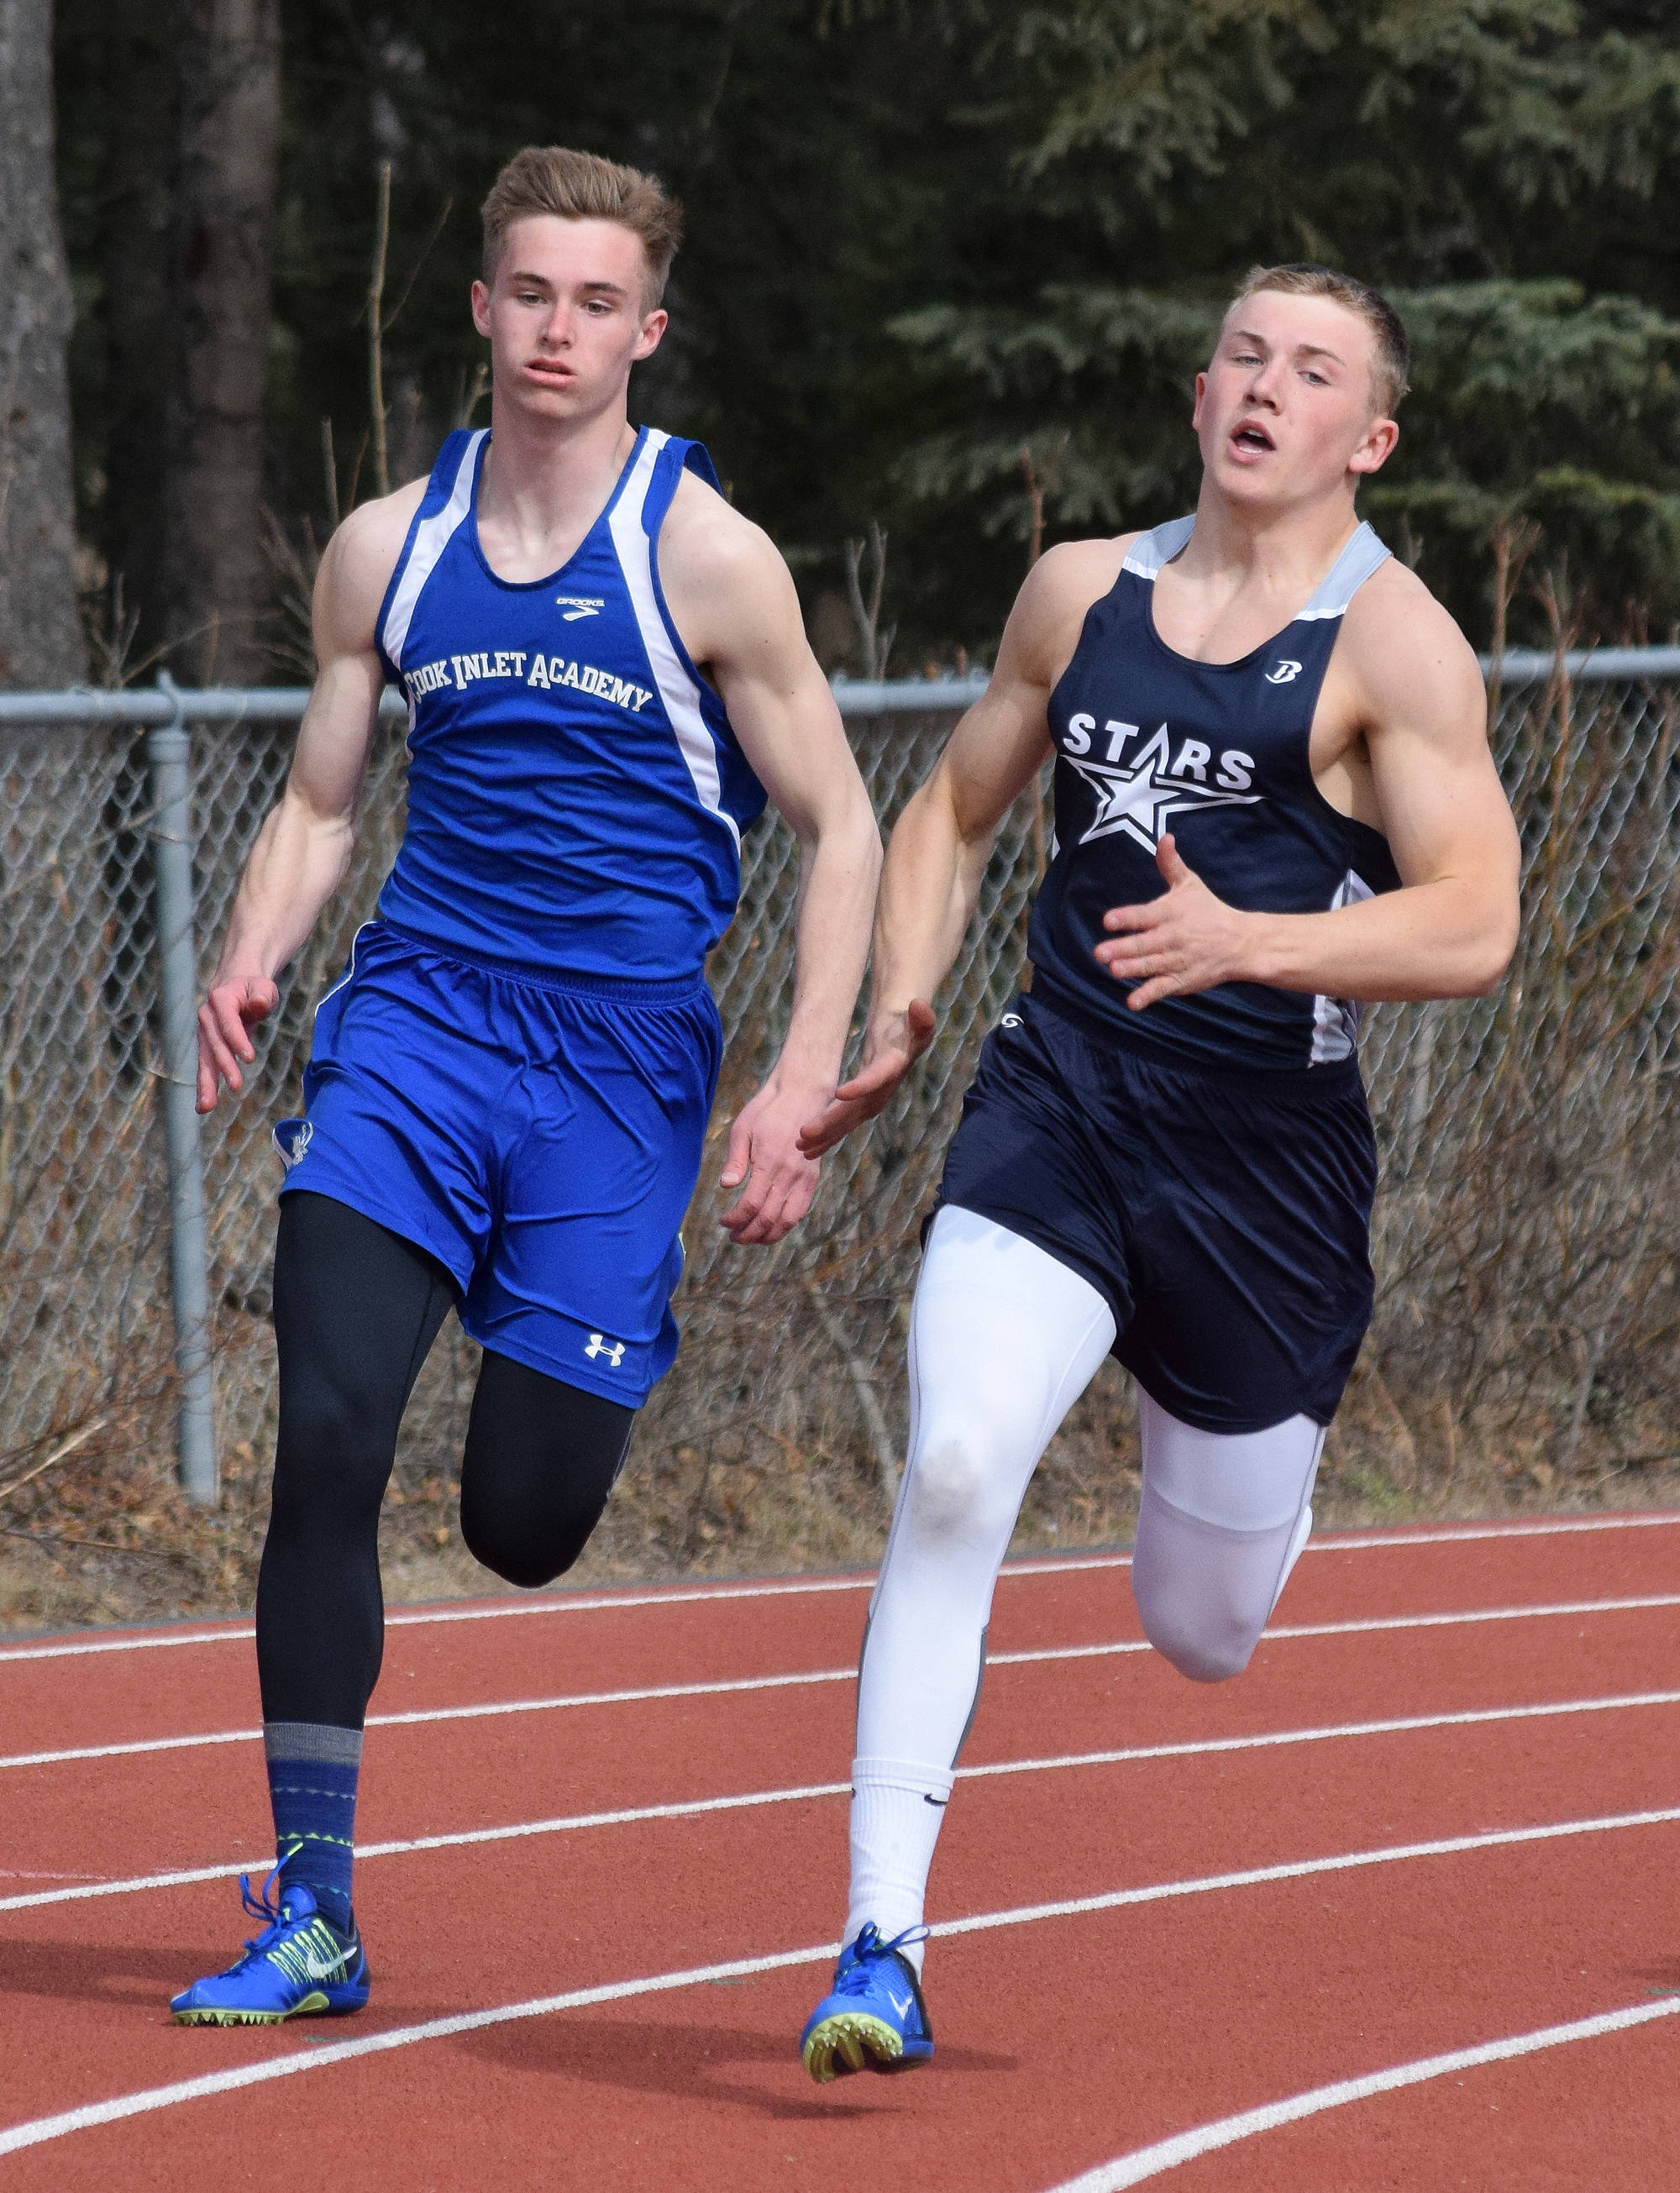 Cook Inlet Academy’s Noah Leaf (left) races Soldotna’s Brenner Furlong in the boys 200-meter sprint April 22 at the Kenai Invitational at Ed Hollier Field in Kenai. (Photo by Joey Klecka/Peninsula Clarion)